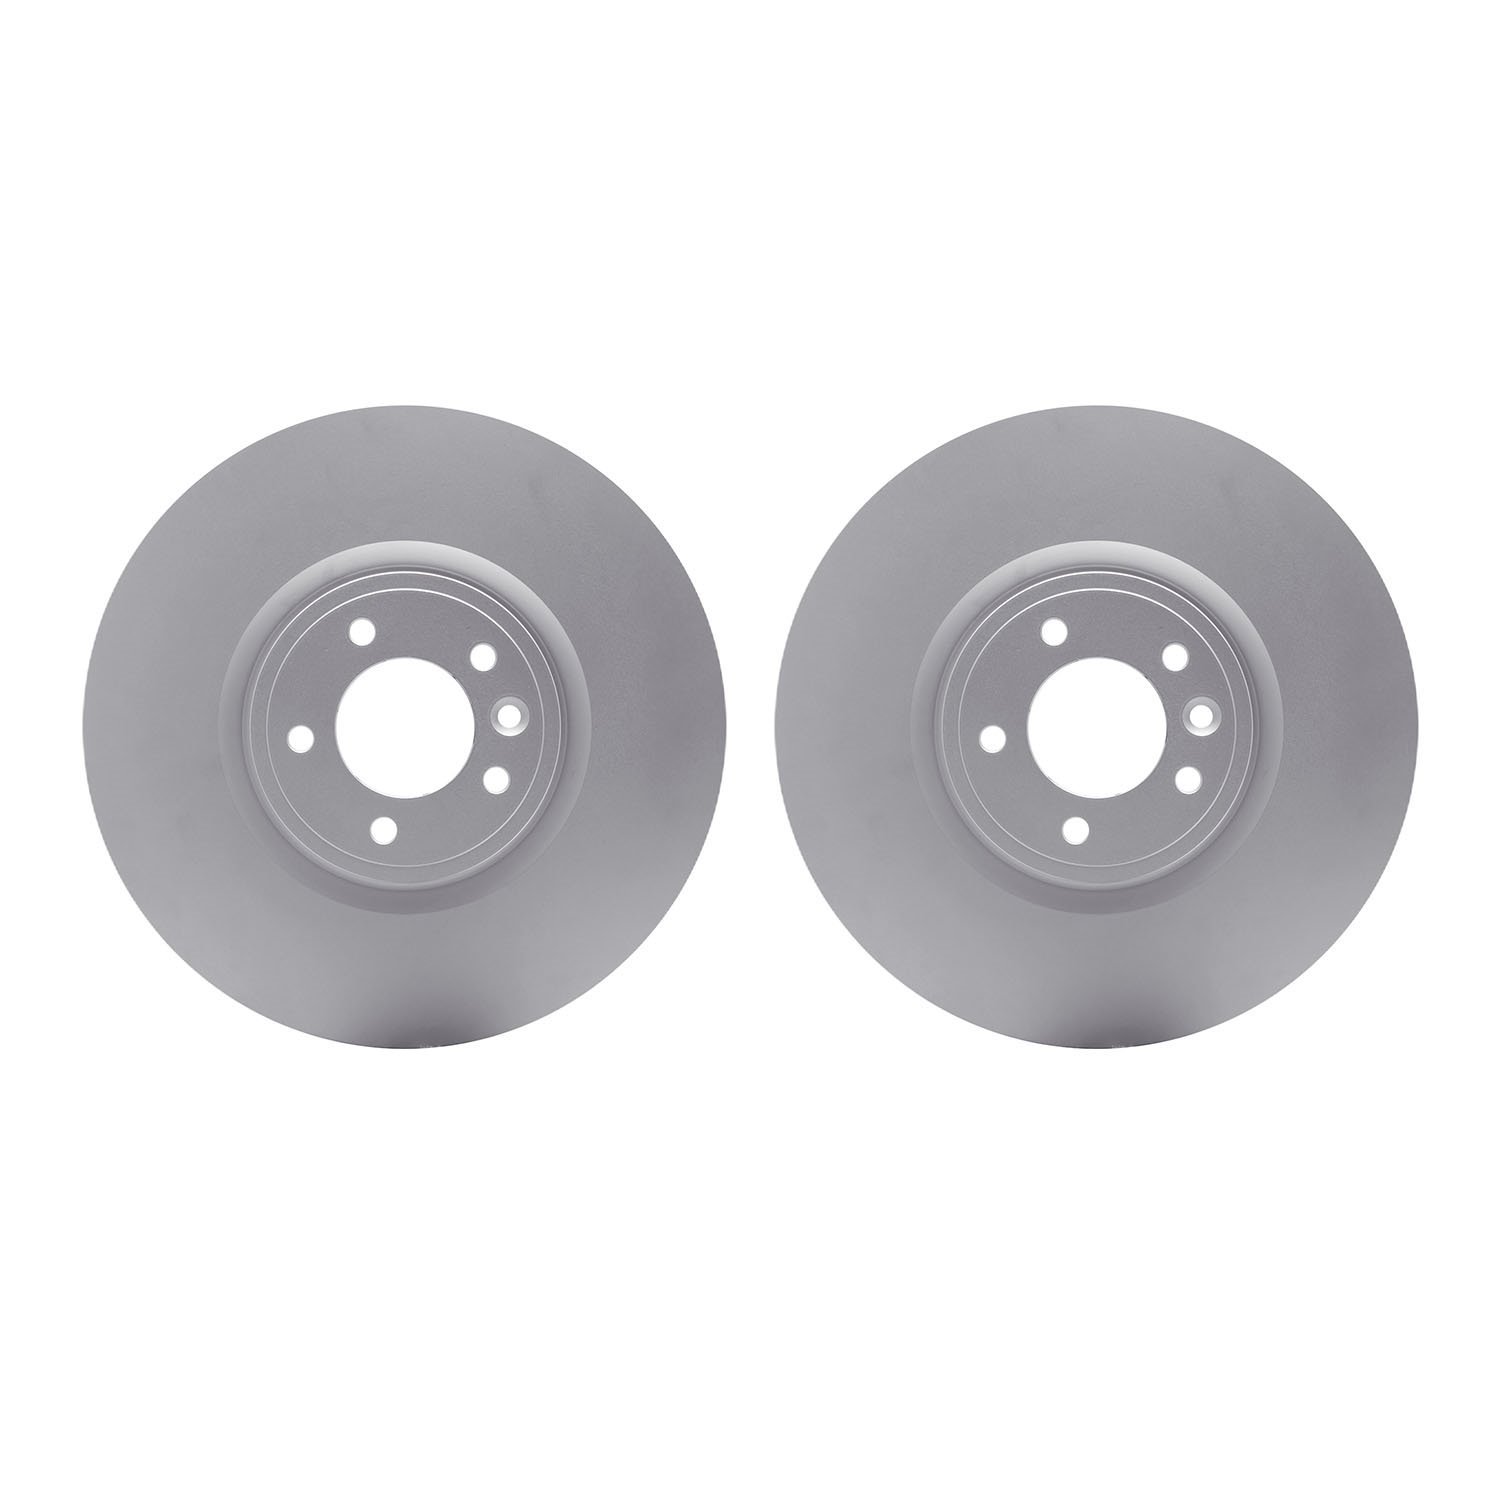 4002-11026 Geospec Brake Rotors, Fits Select Land Rover, Position: Front